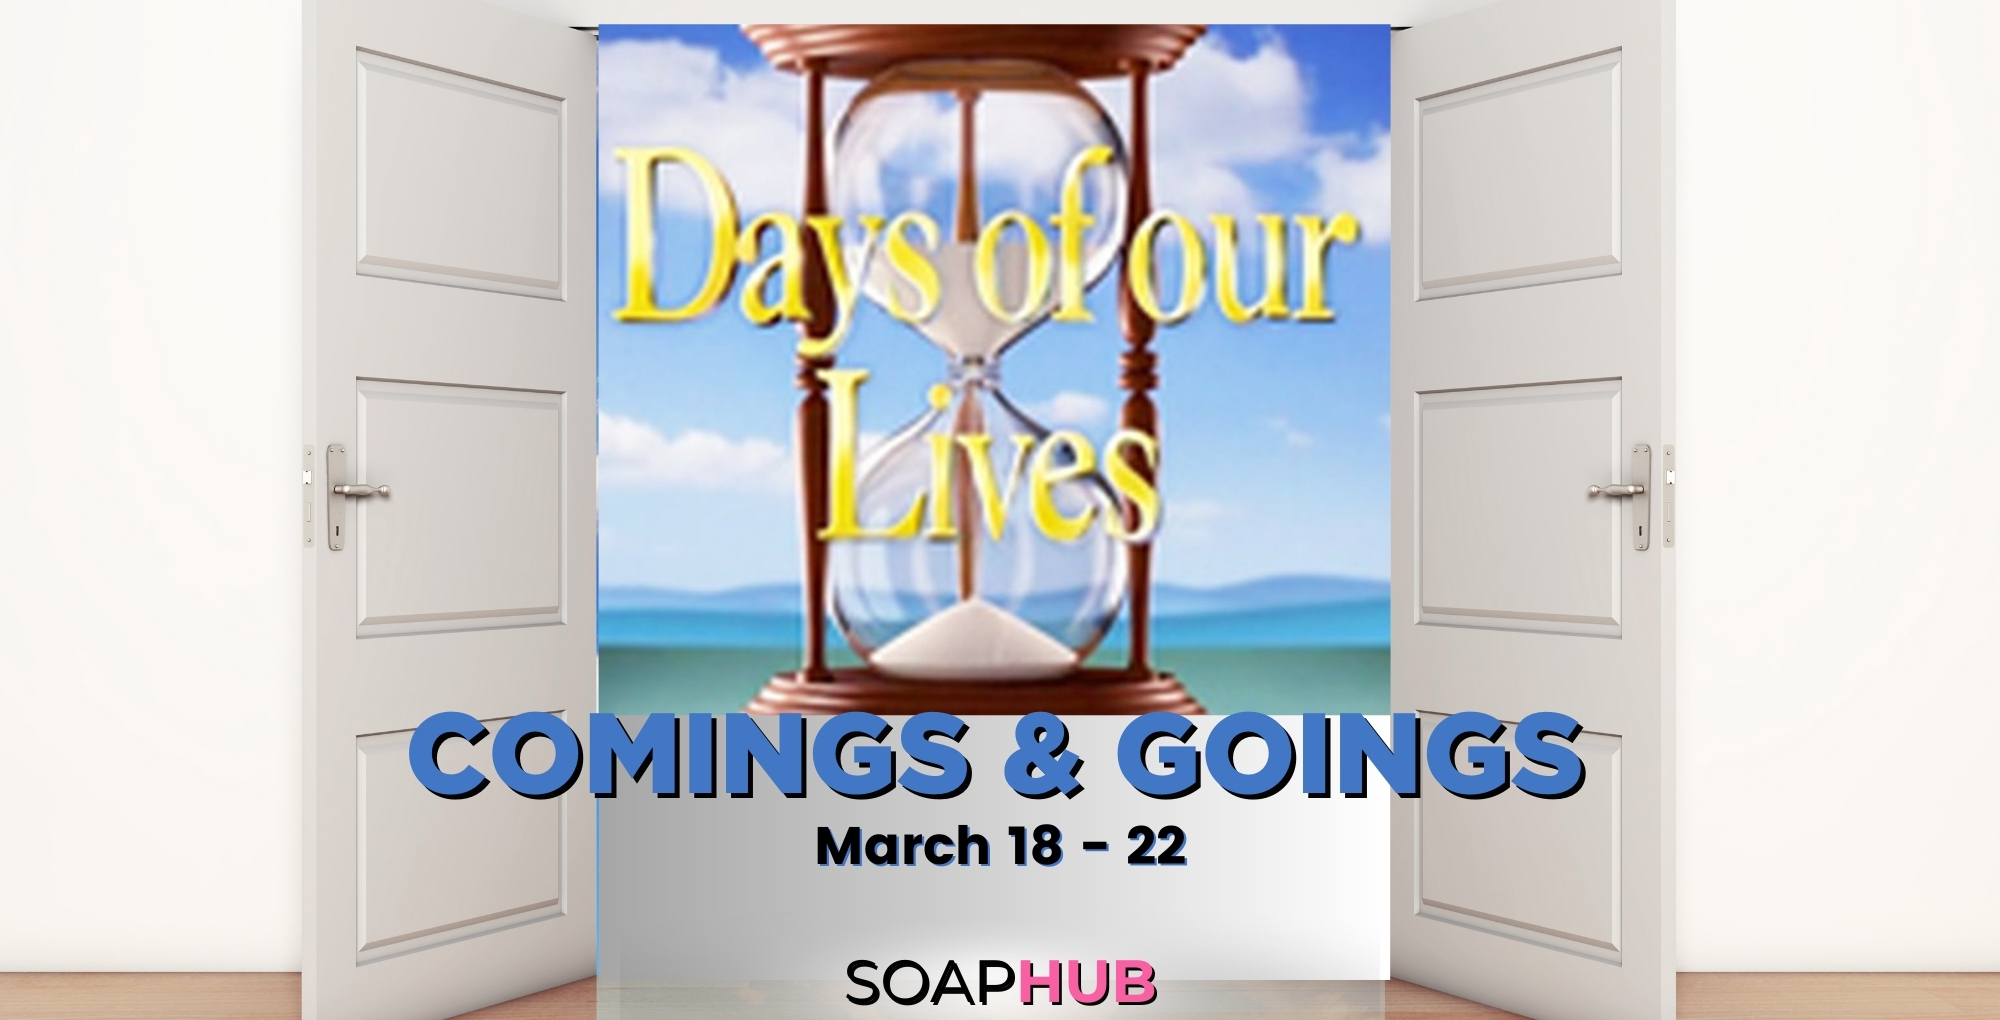 Days of our Lives comings and goings for March 18-22 with open doors and a Soap Hub logo across the bottom.